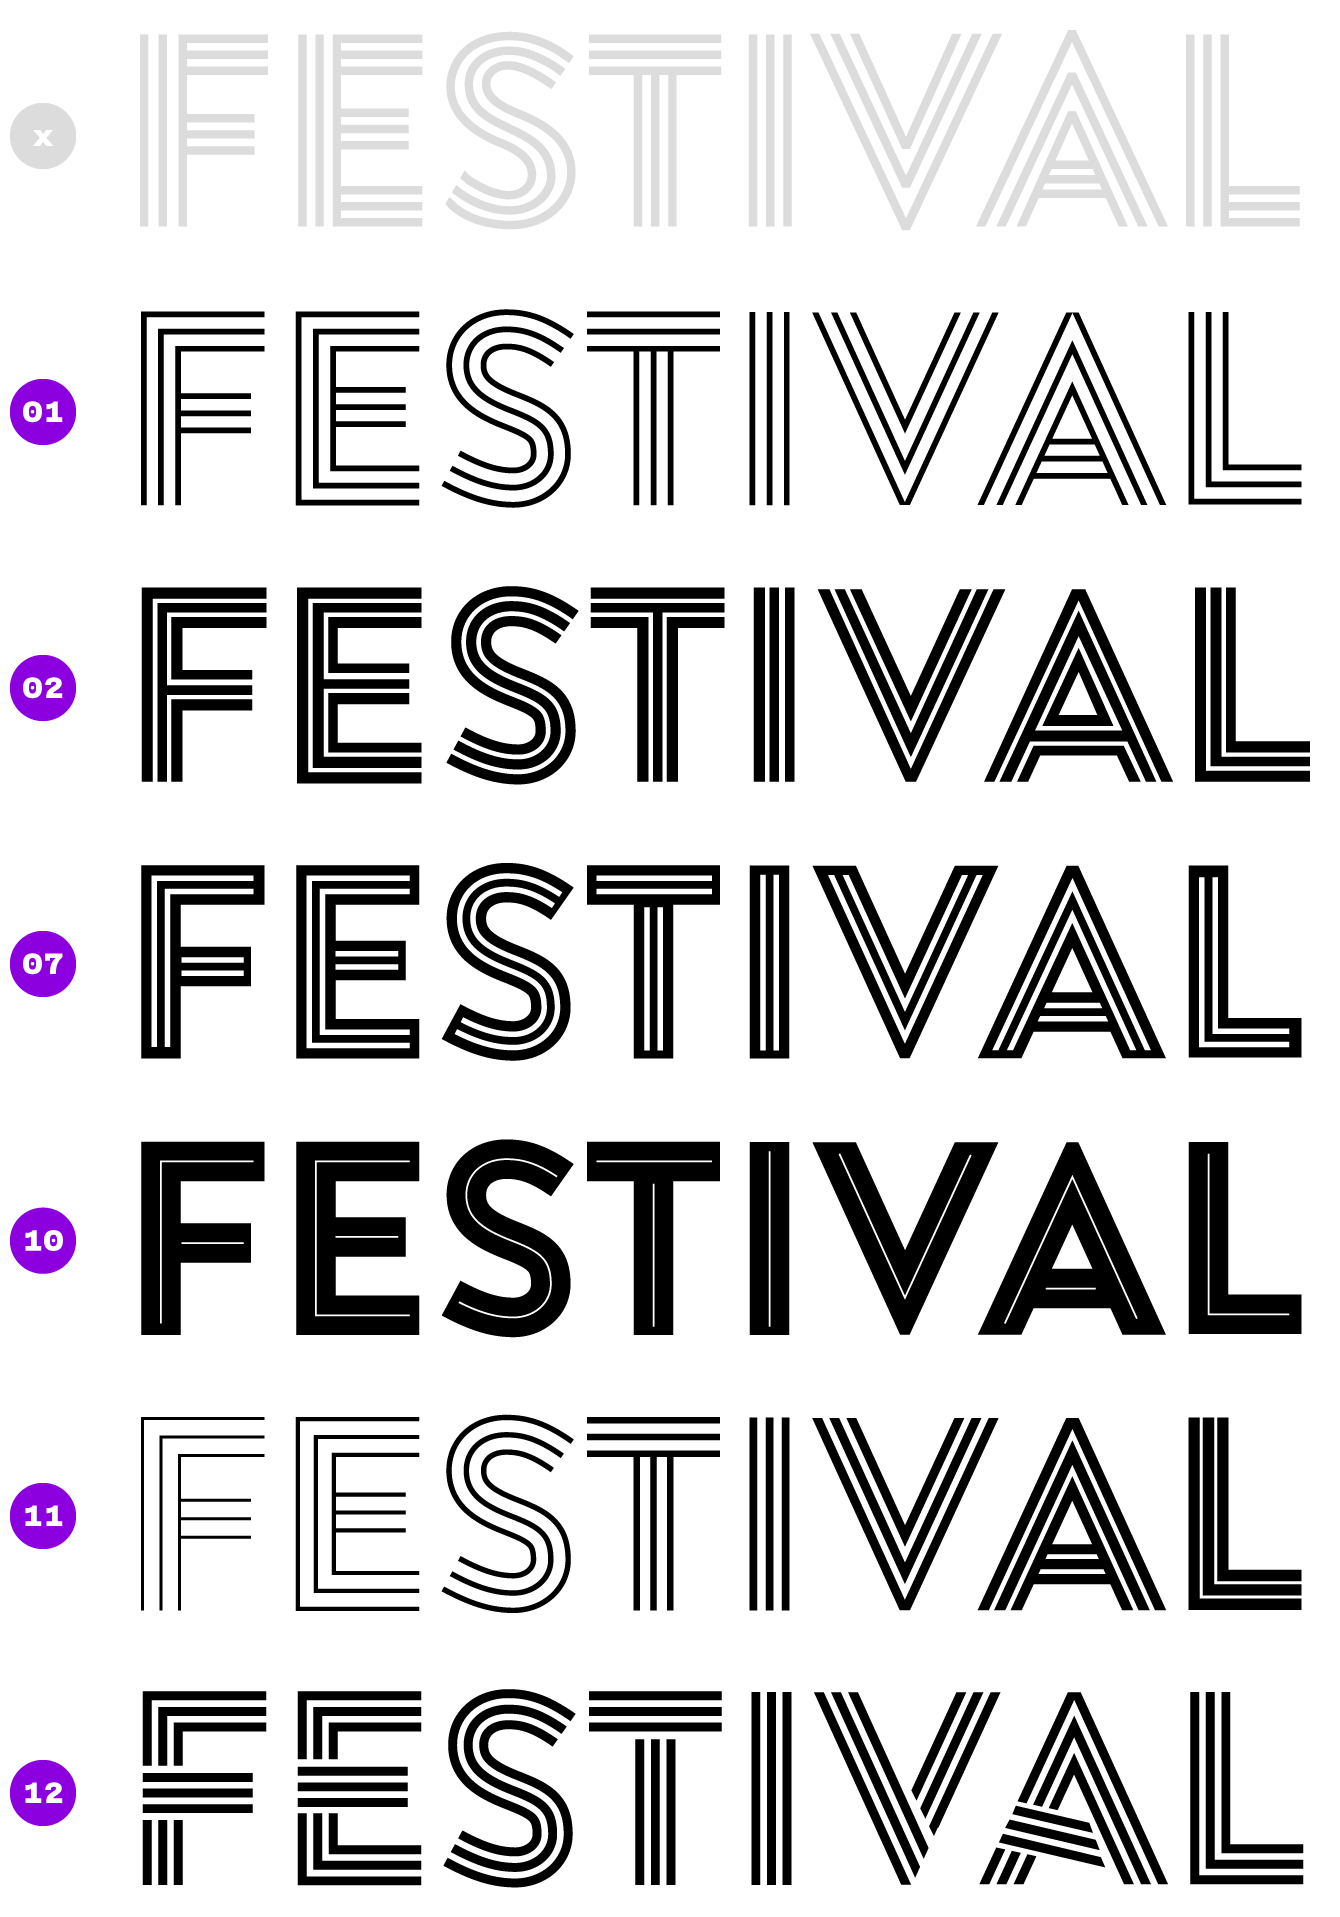 custom type, typografische Anpassung, typographic, adaptation, Jakob Runge,26+, 26plus, Type-Job, Dominic Forde, Famous Visual Services, Melbourne Festival, Art, inline, striped, optically improve